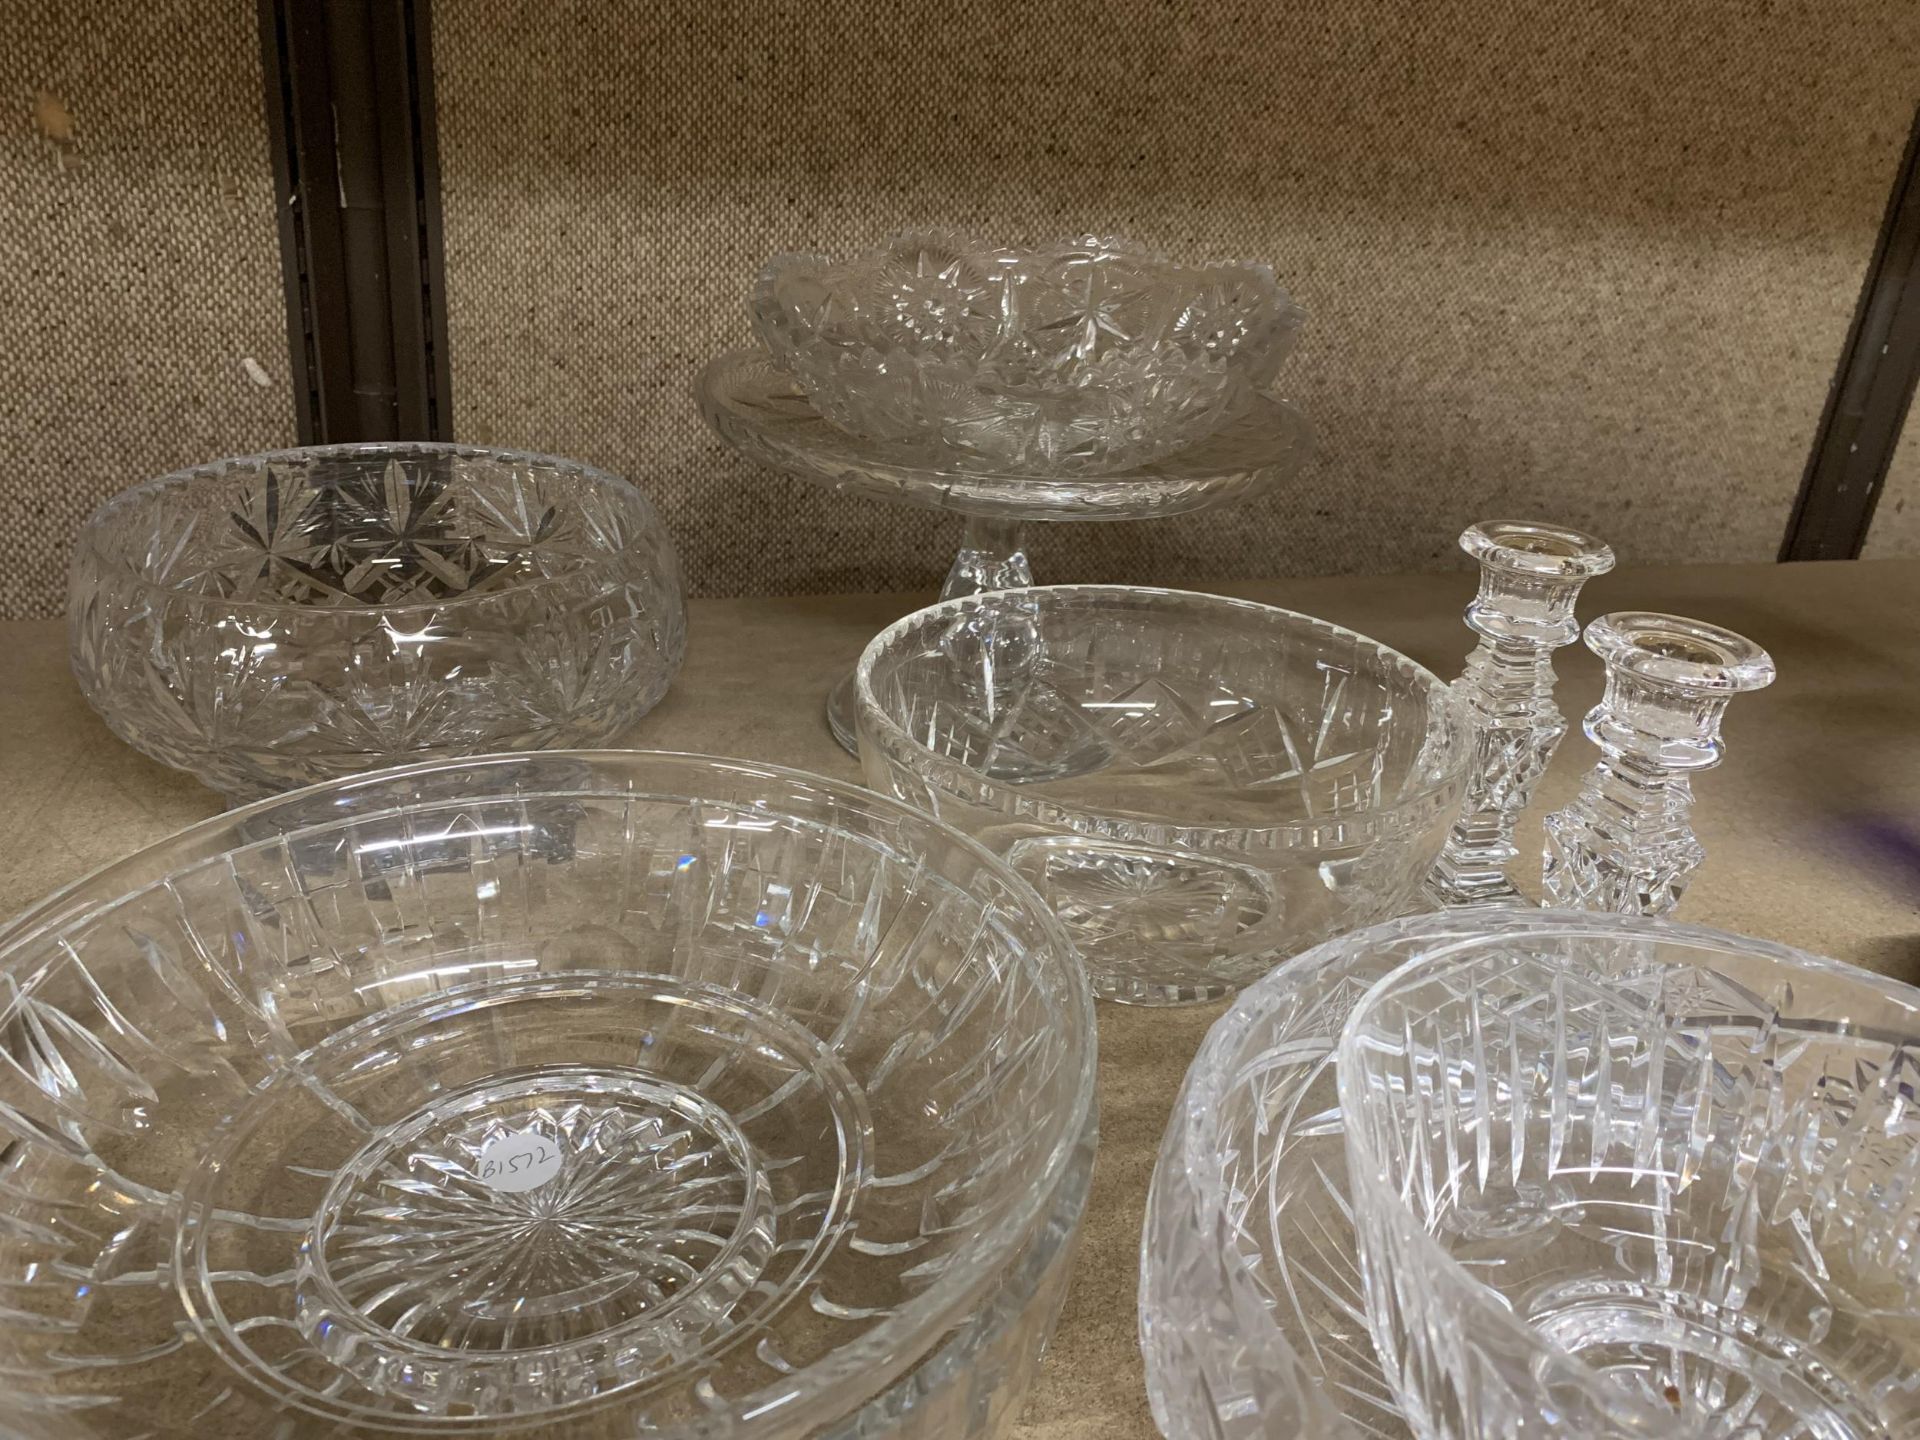 A LARGE QUANTITY OF GLASSWARE TO INCLUDE CUT GLASS BOWLS, CANDLESTICKS, A CAKE STAND, PART - Image 4 of 4